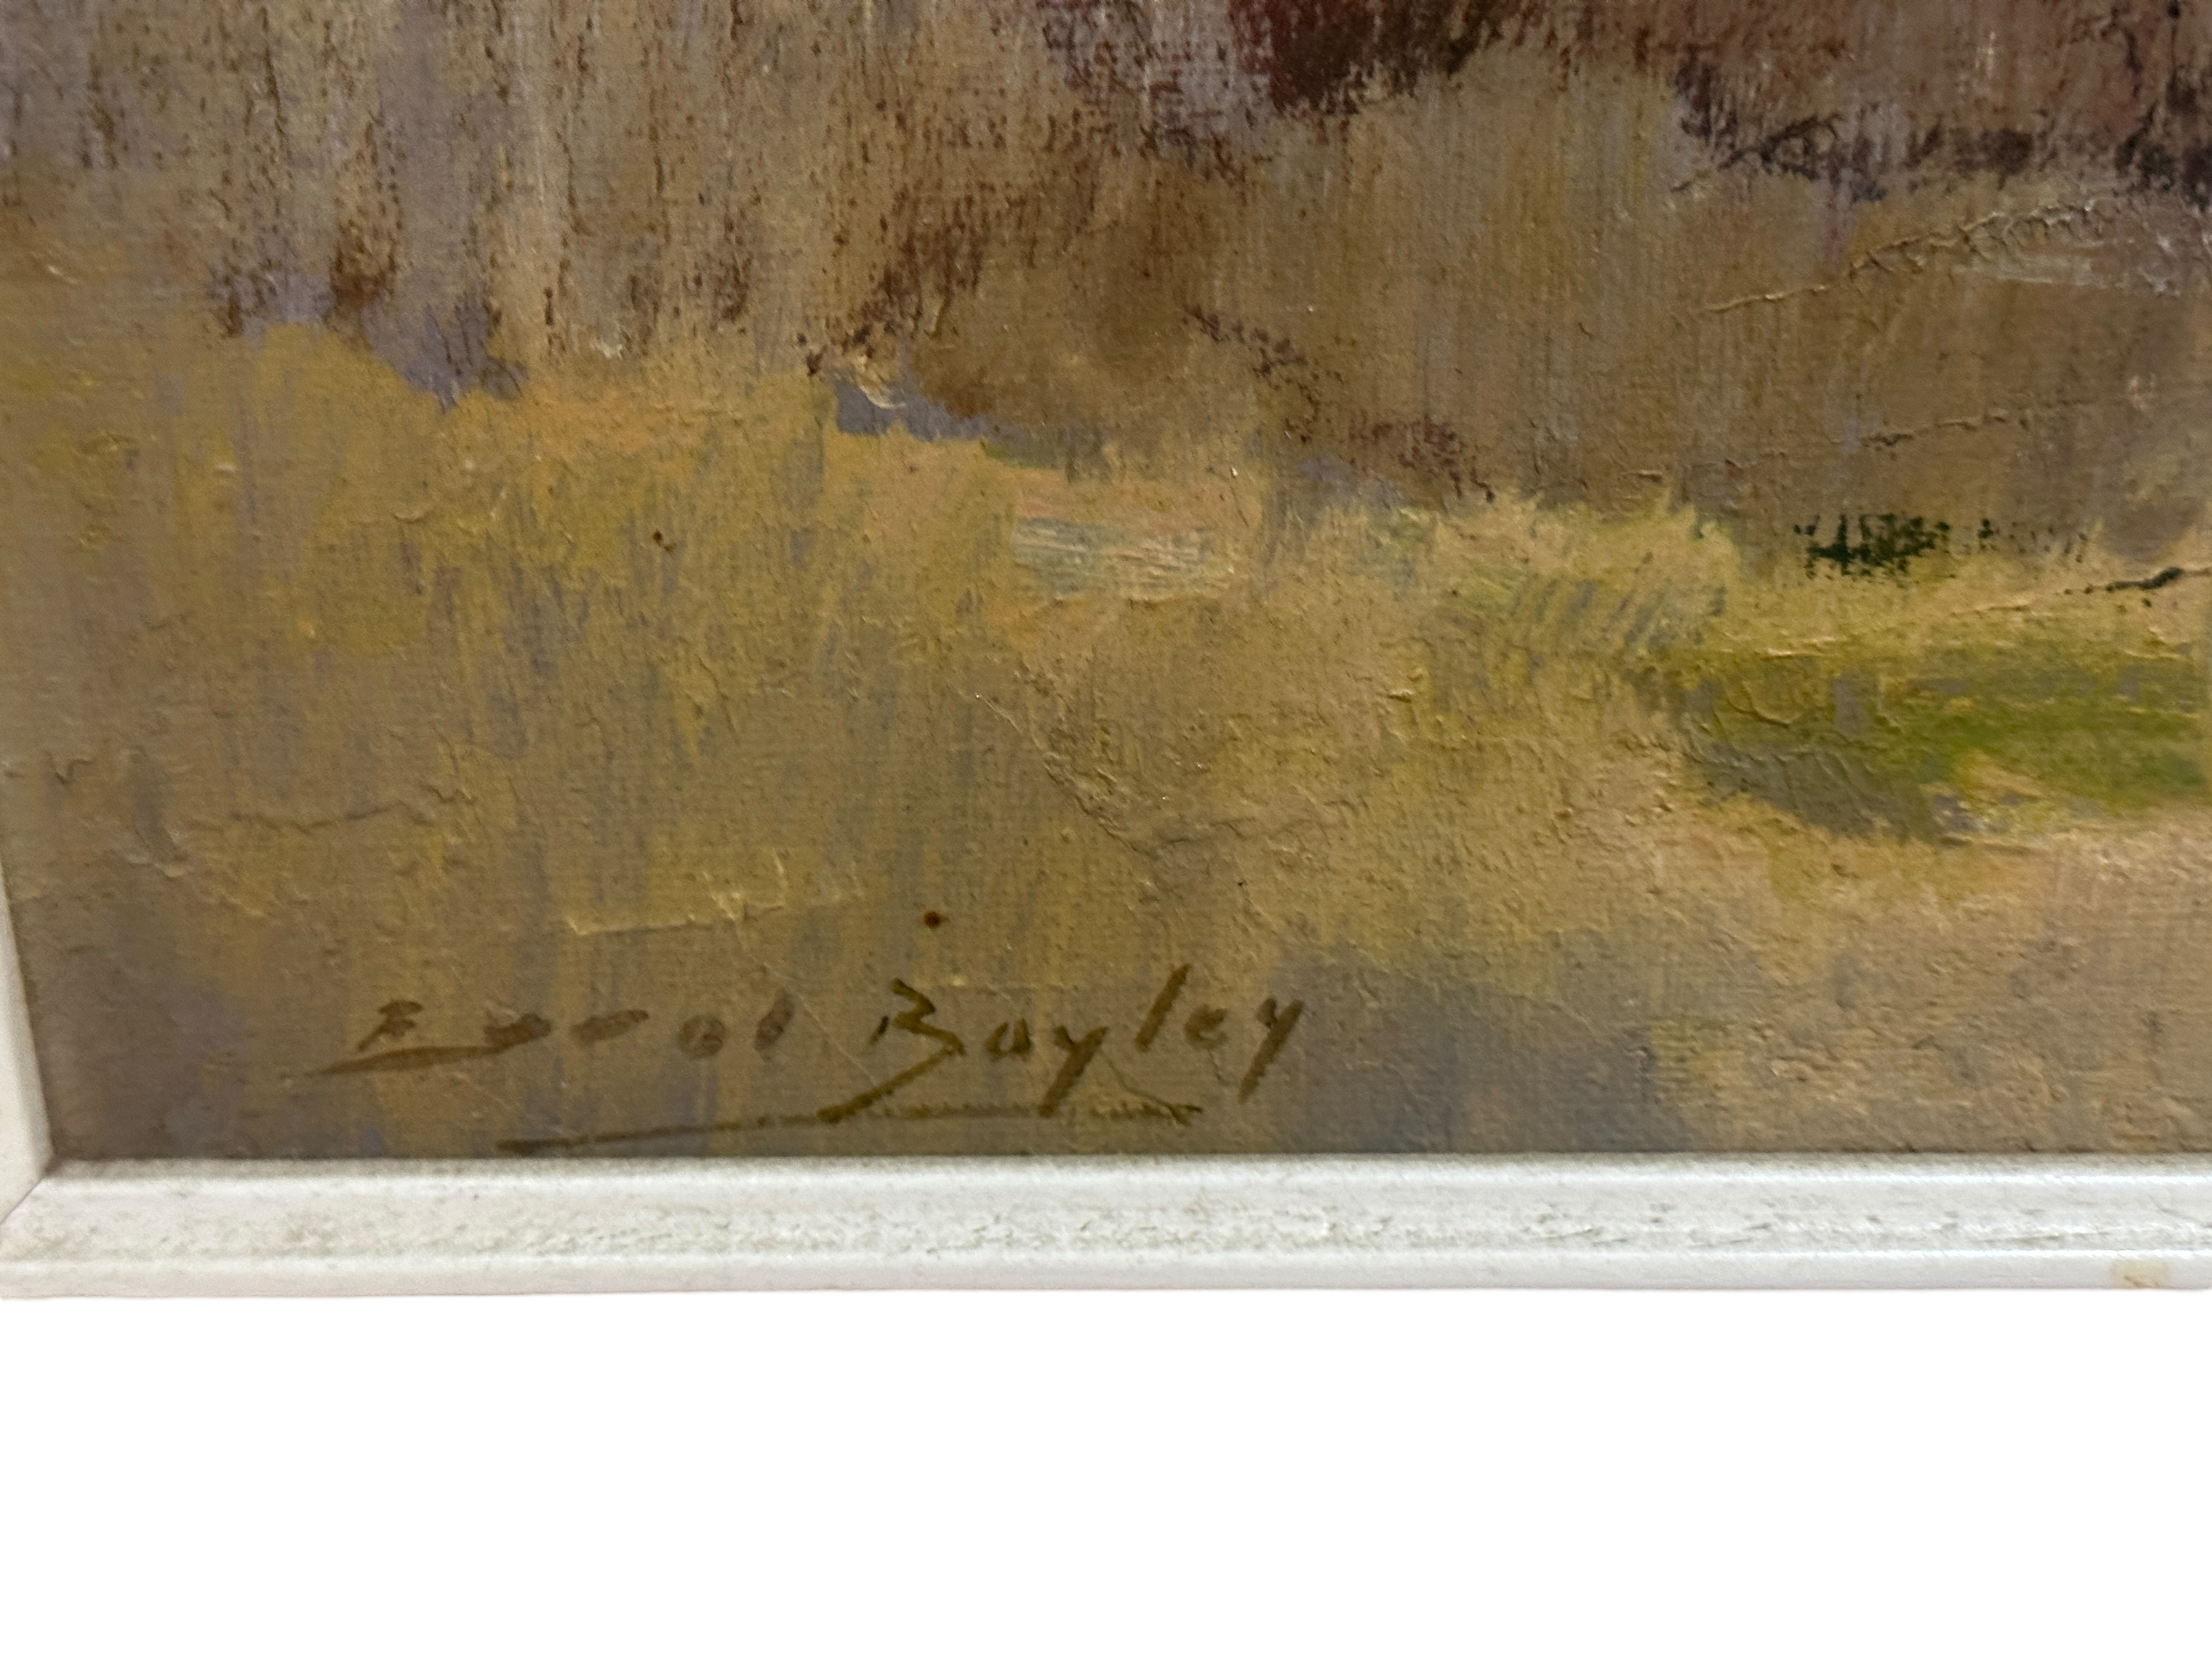 Trio of Errol Boyley Oil Paintings - Landscapes and one with Sheep in Landscape. - Image 3 of 8